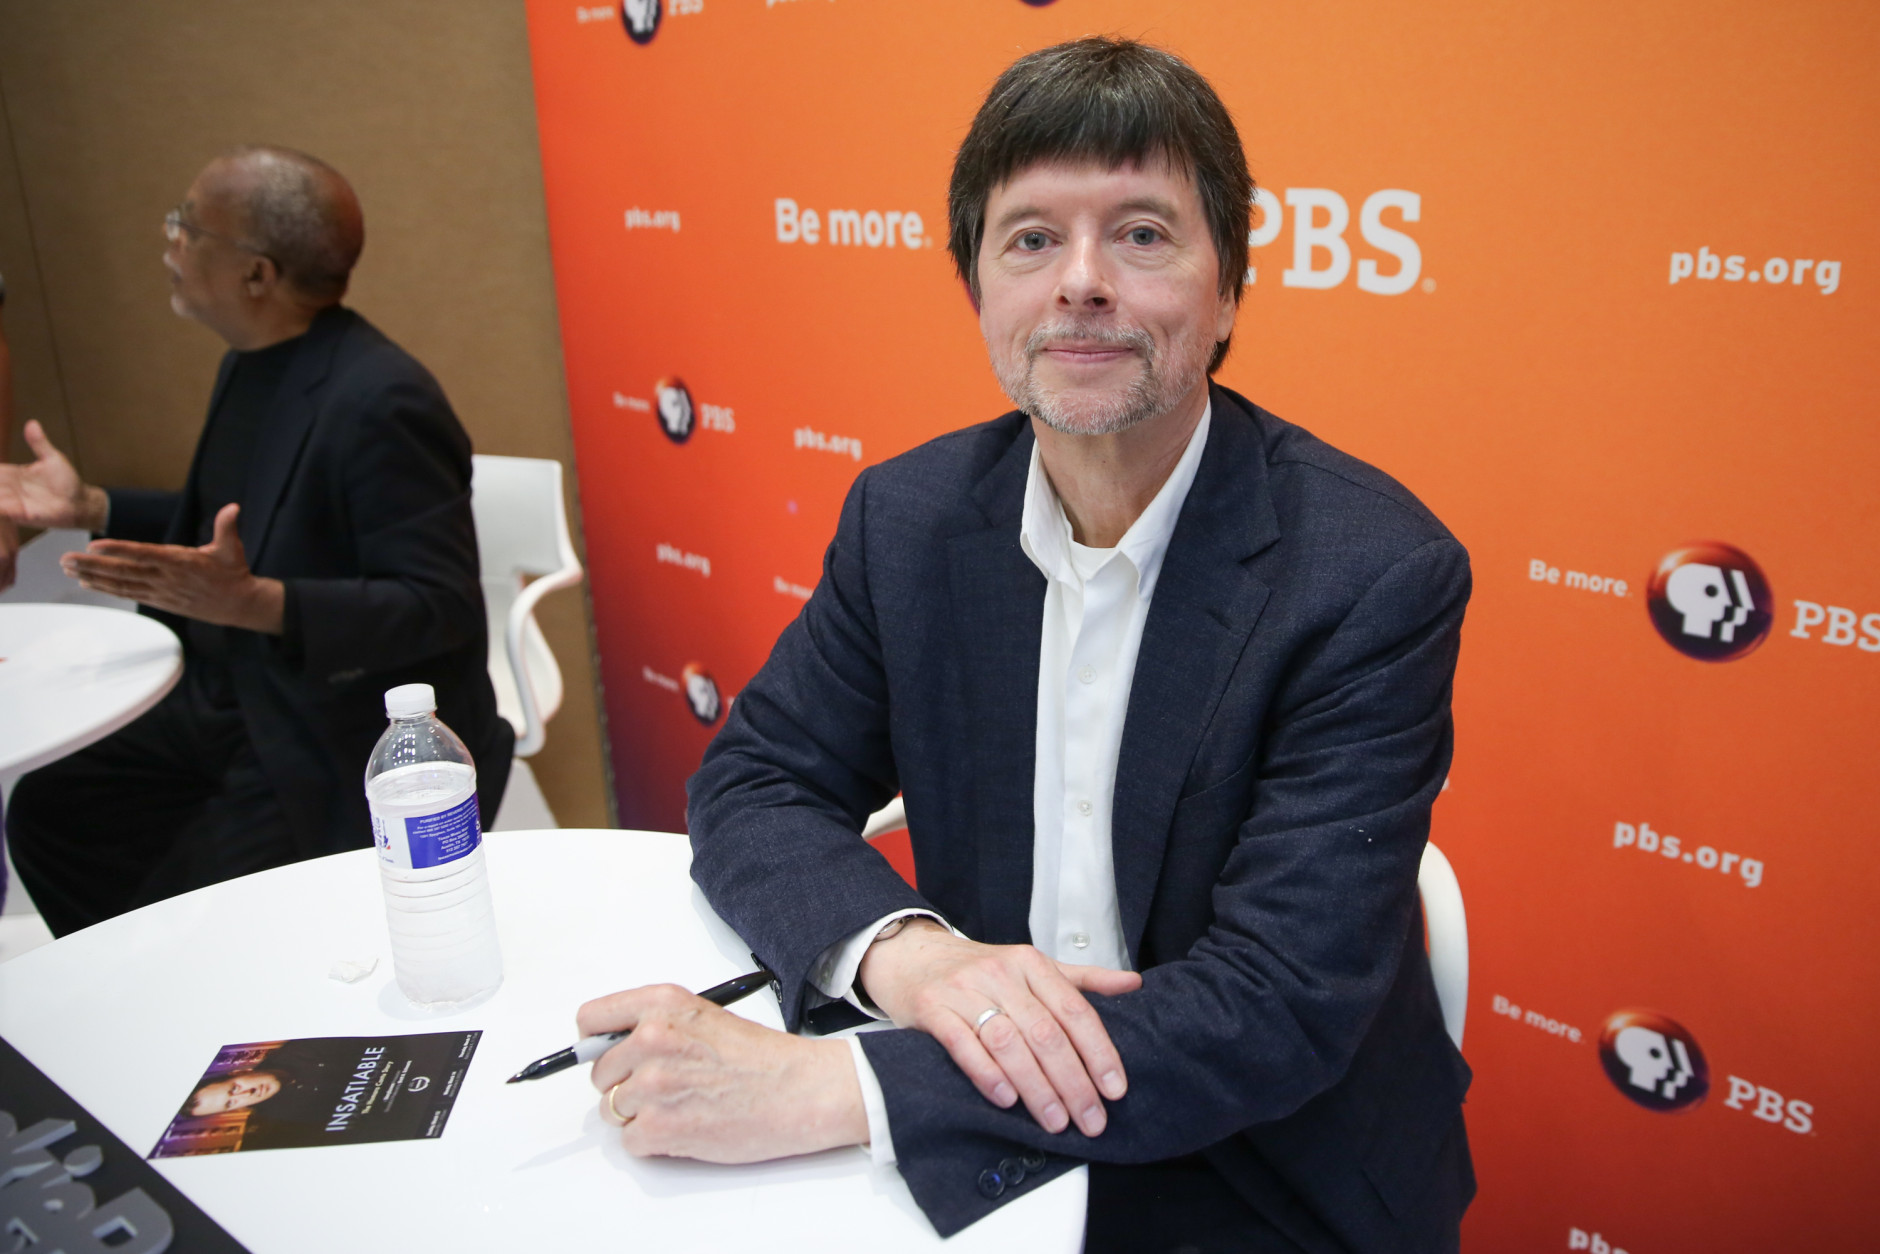 Filmmaker Ken Burns appears at meet and greet during South By Southwest at the Austin Convention Center on Saturday, March 12, 2016, in Austin, Texas. (Photo by Rich Fury/Invision/AP